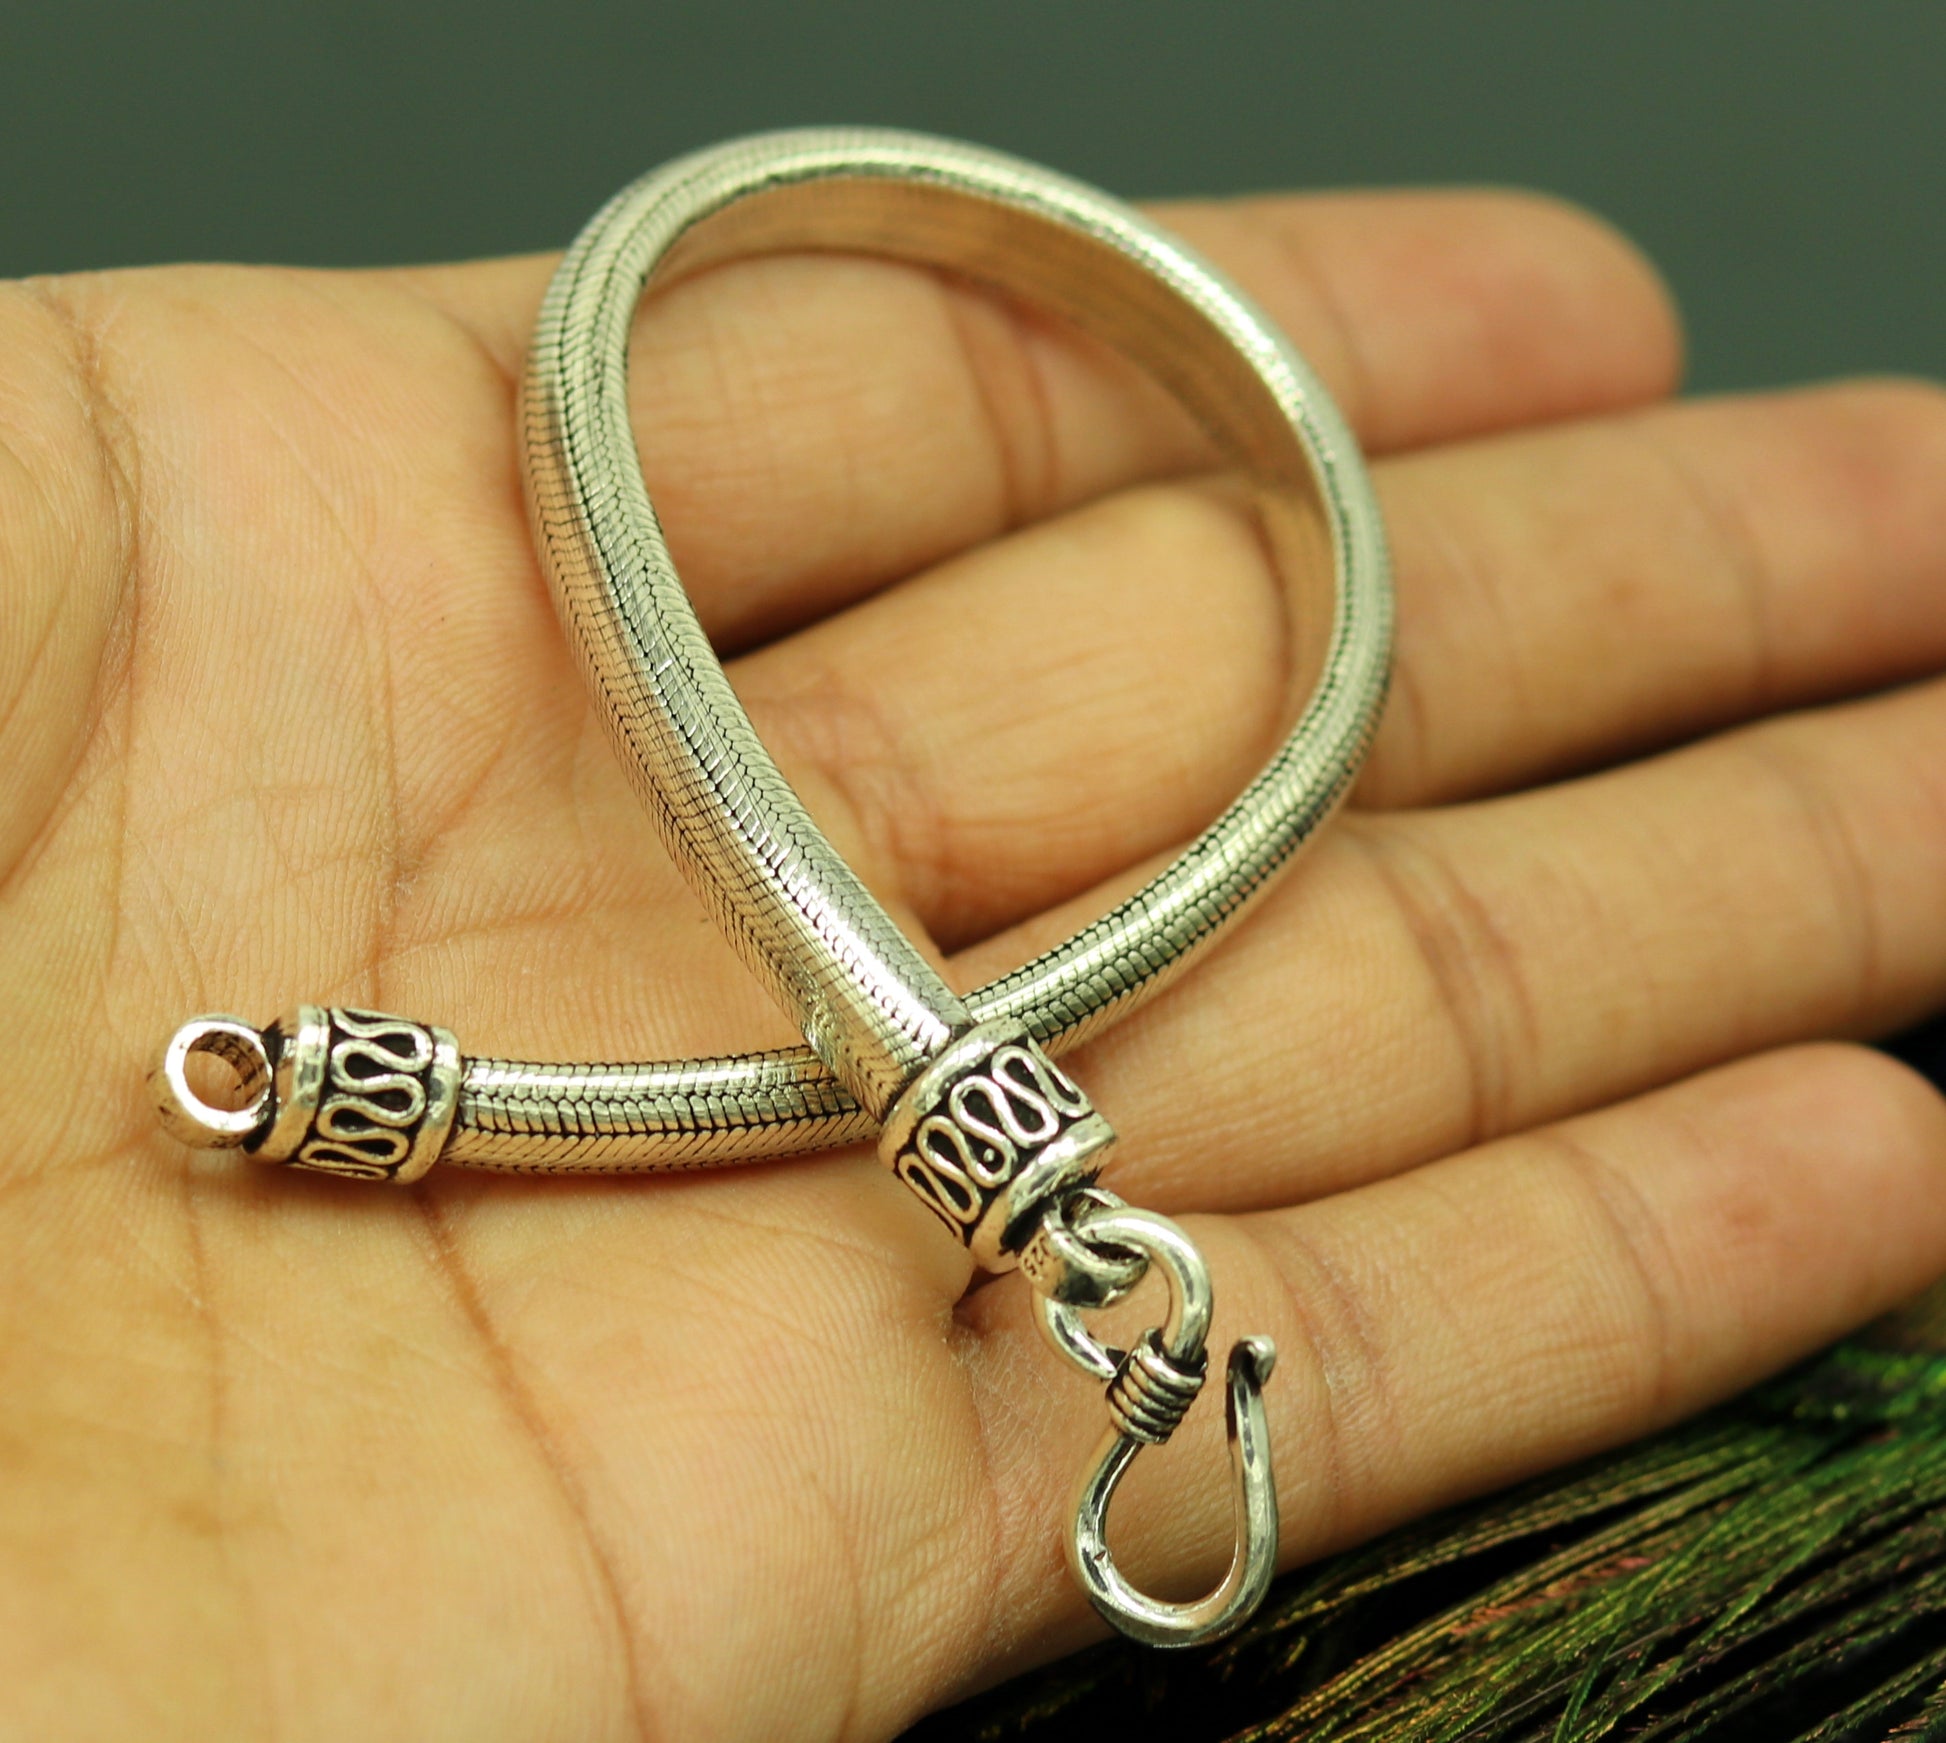 8.2" solid 925 sterling silver handmade snake chain customized half round D shape design bracelet, personalized gifting jewelry sbr209 - TRIBAL ORNAMENTS